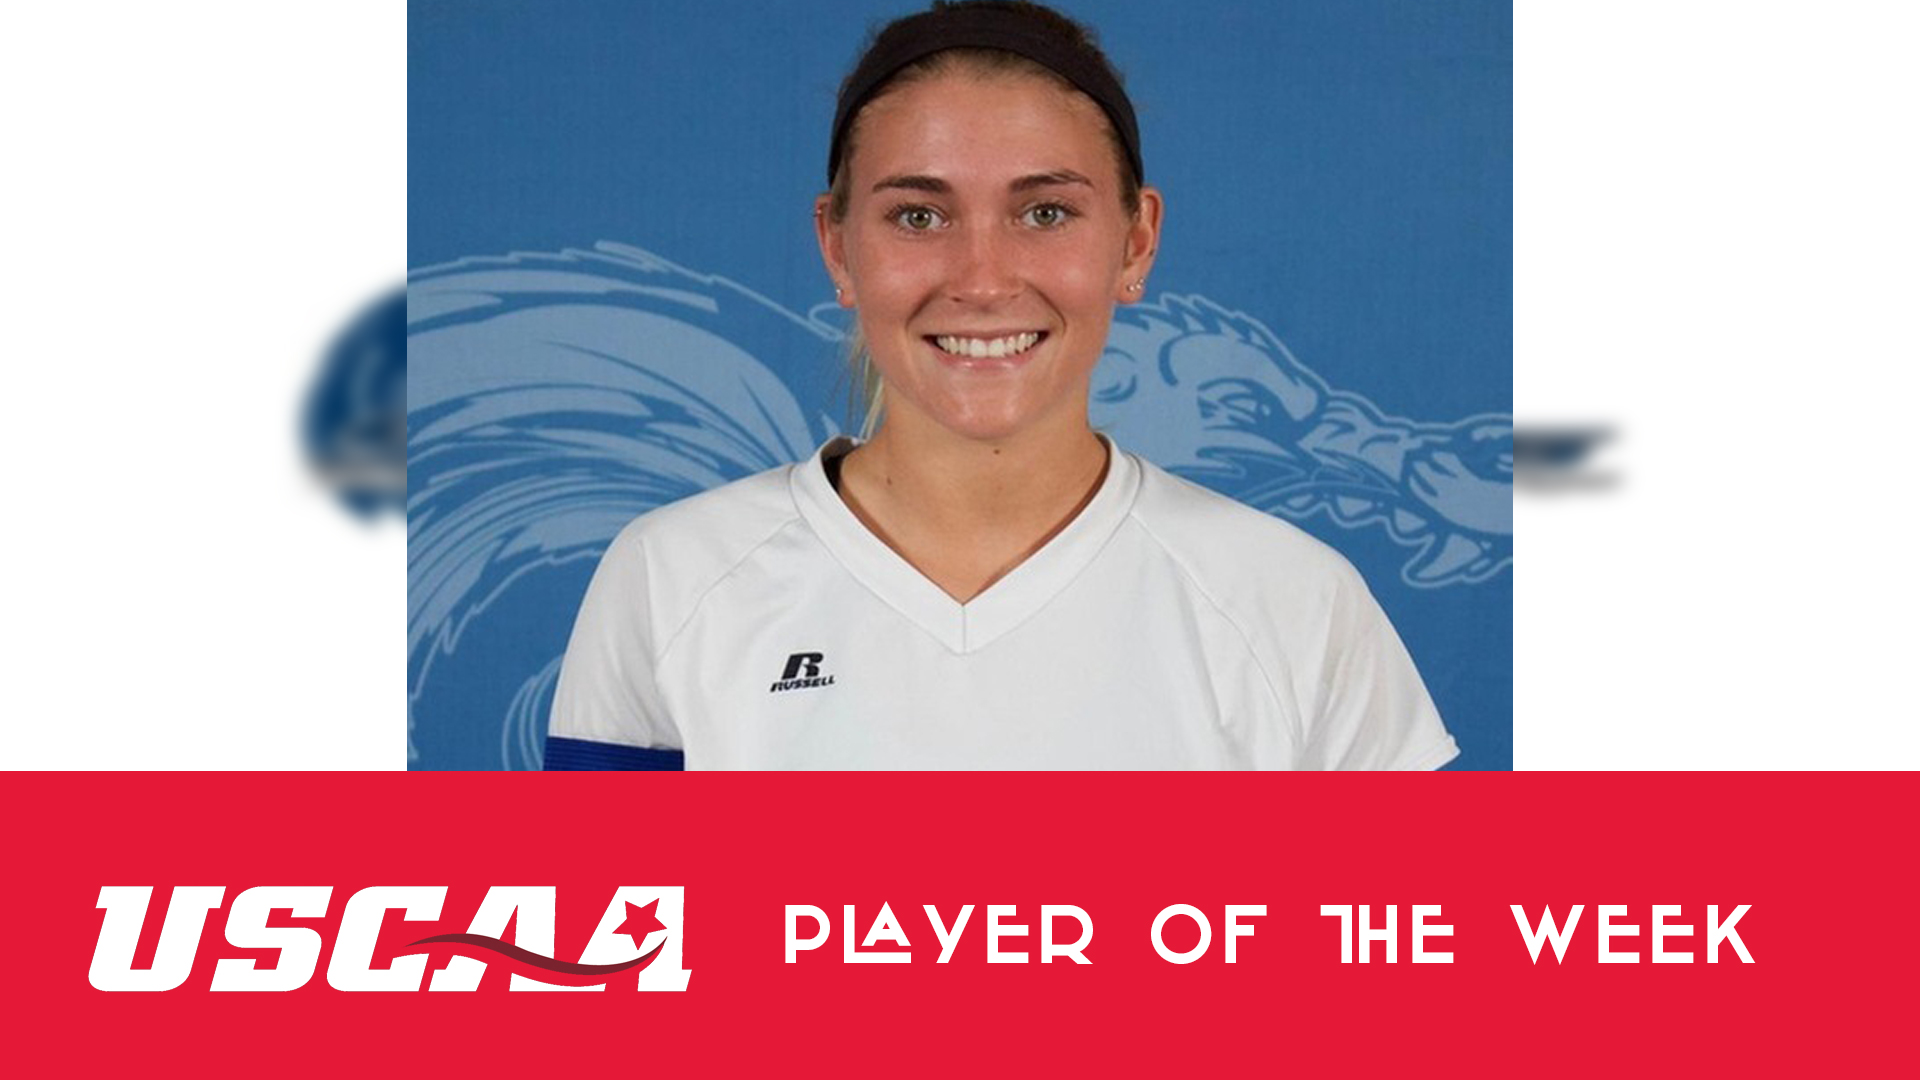 SMCC's Callie O'Brien wins USCAA Player of the Week